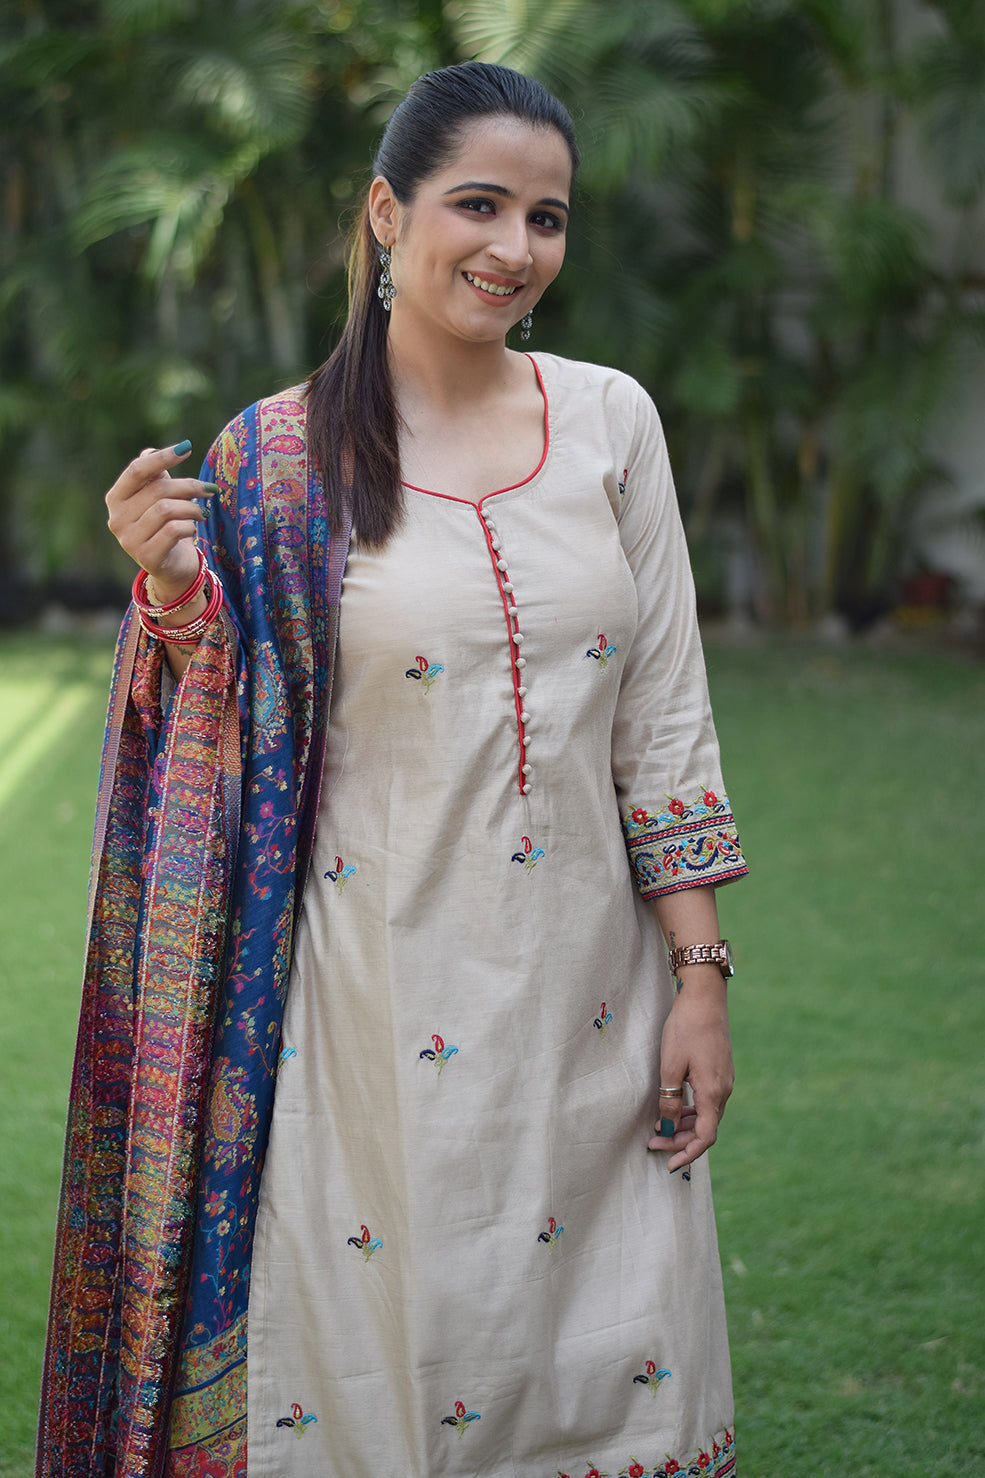 Simple kurta and heavy accessories gel together like anything!! |  Photography poses women, Photoshoot poses, Girl photo poses